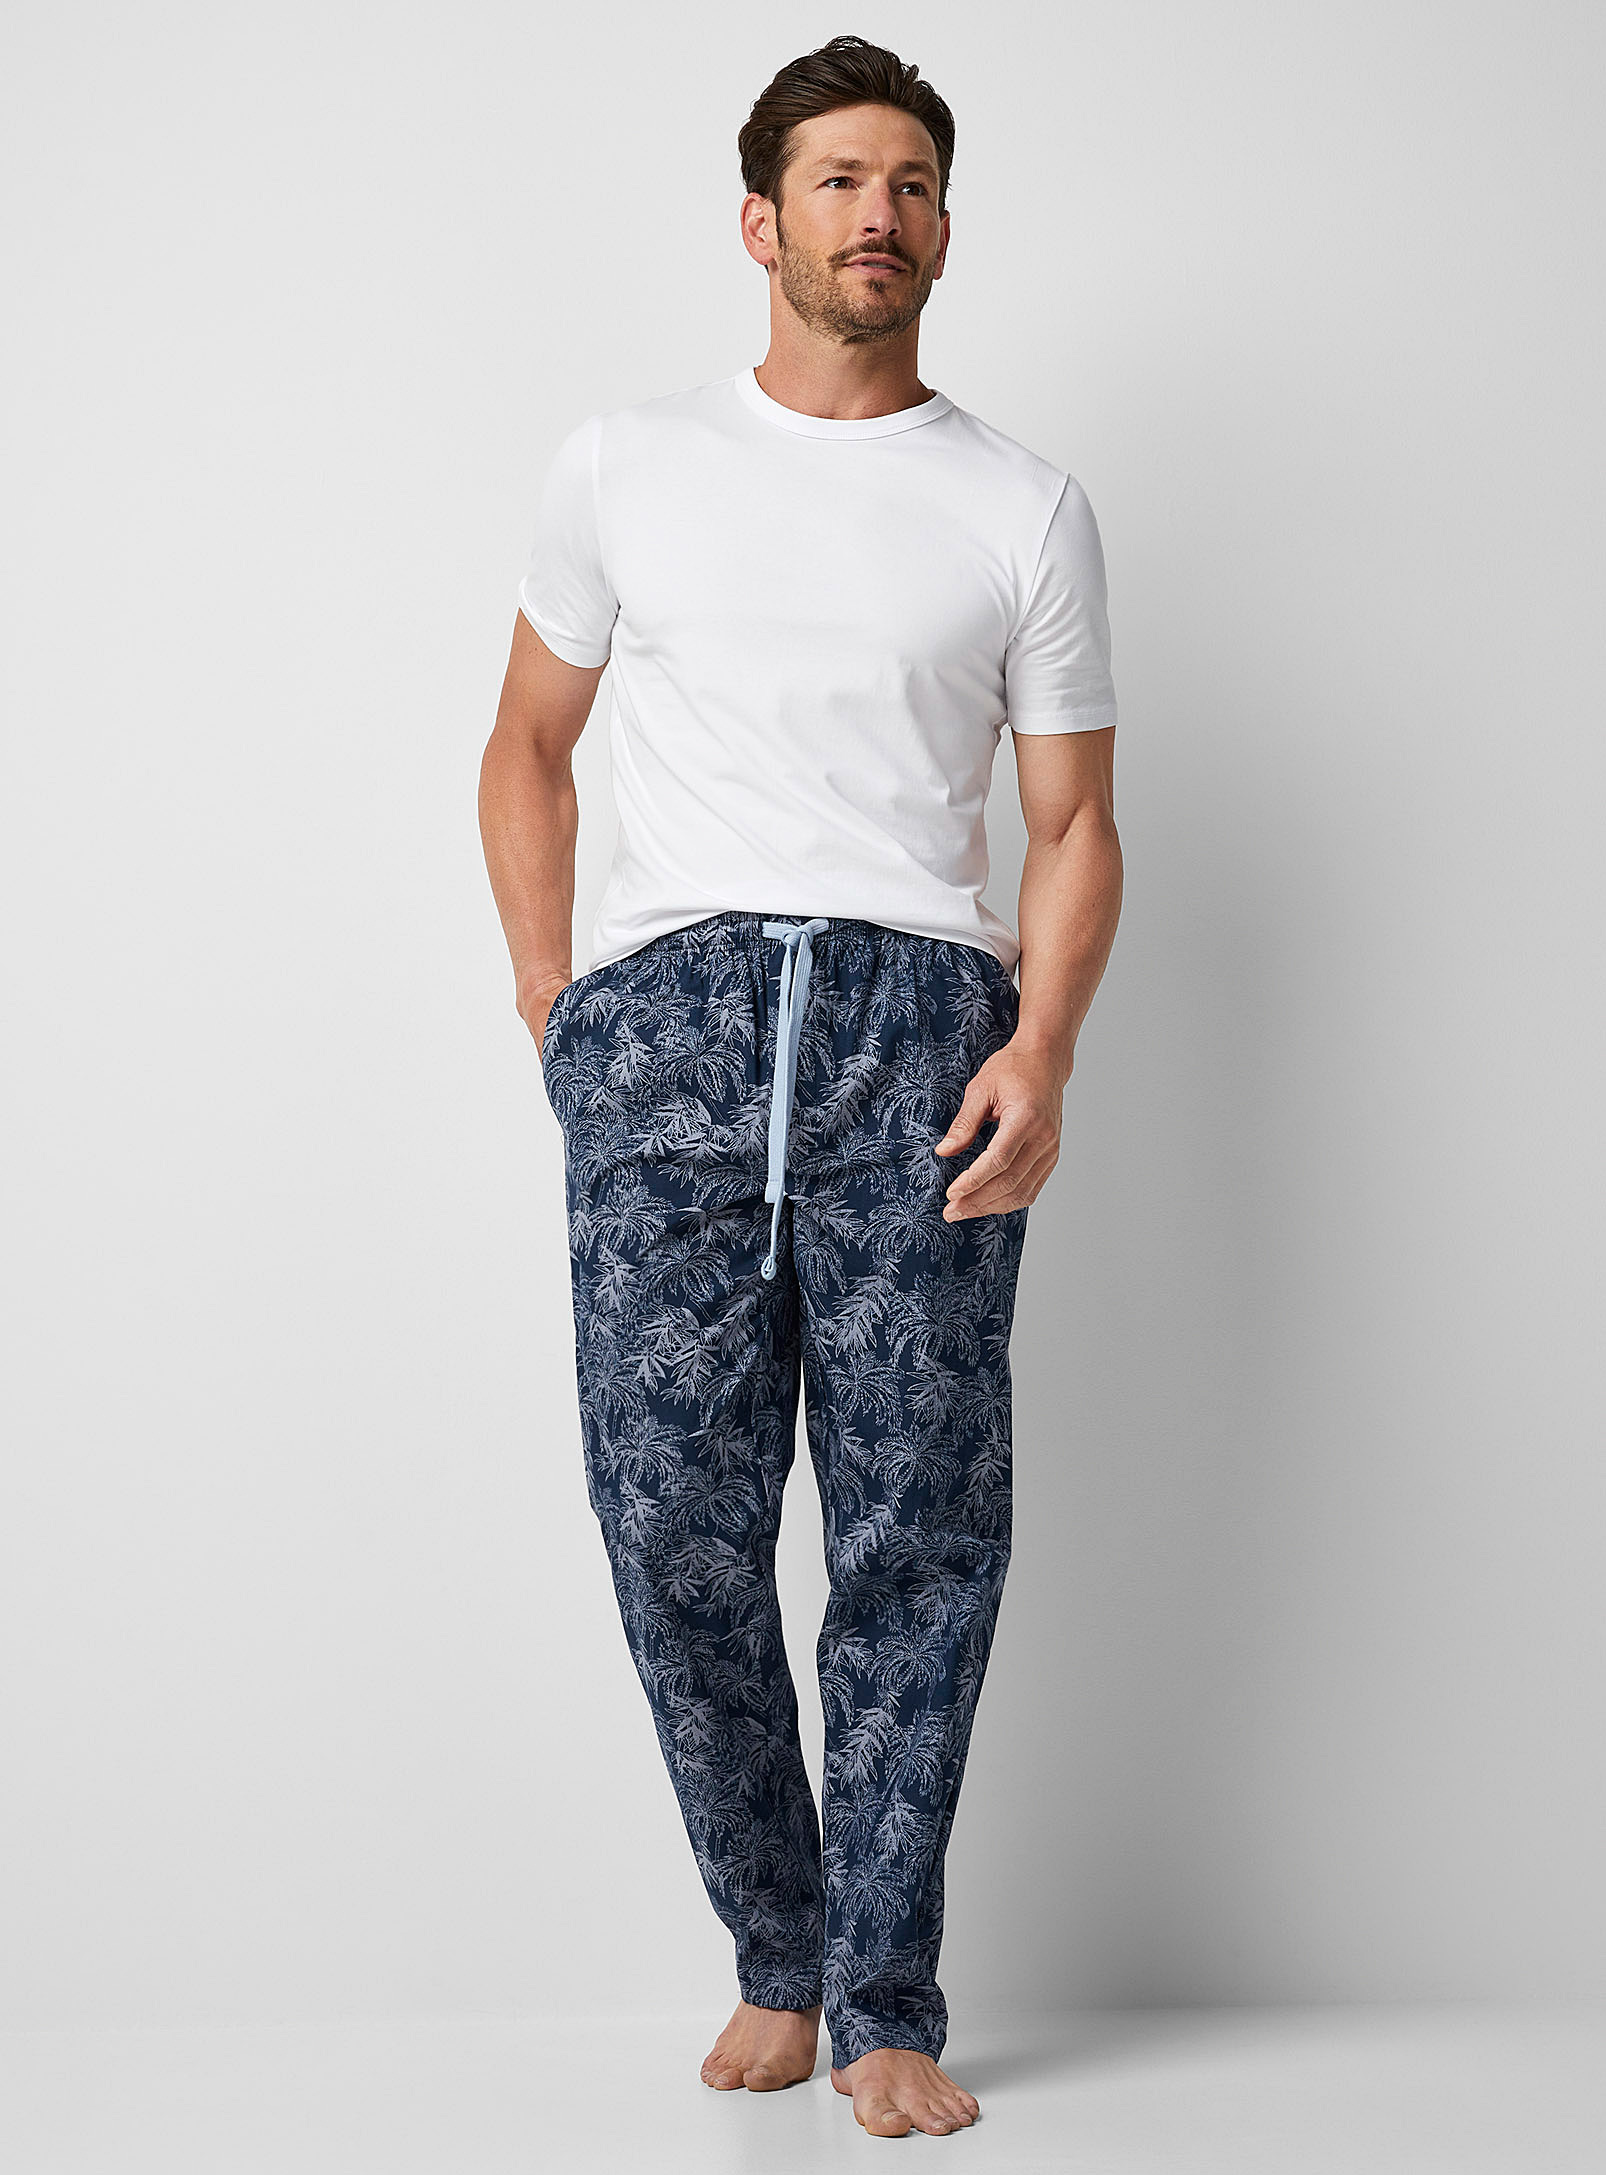 Majestic Palm Tree 100% Cotton Lounge Pant In Patterned Blue